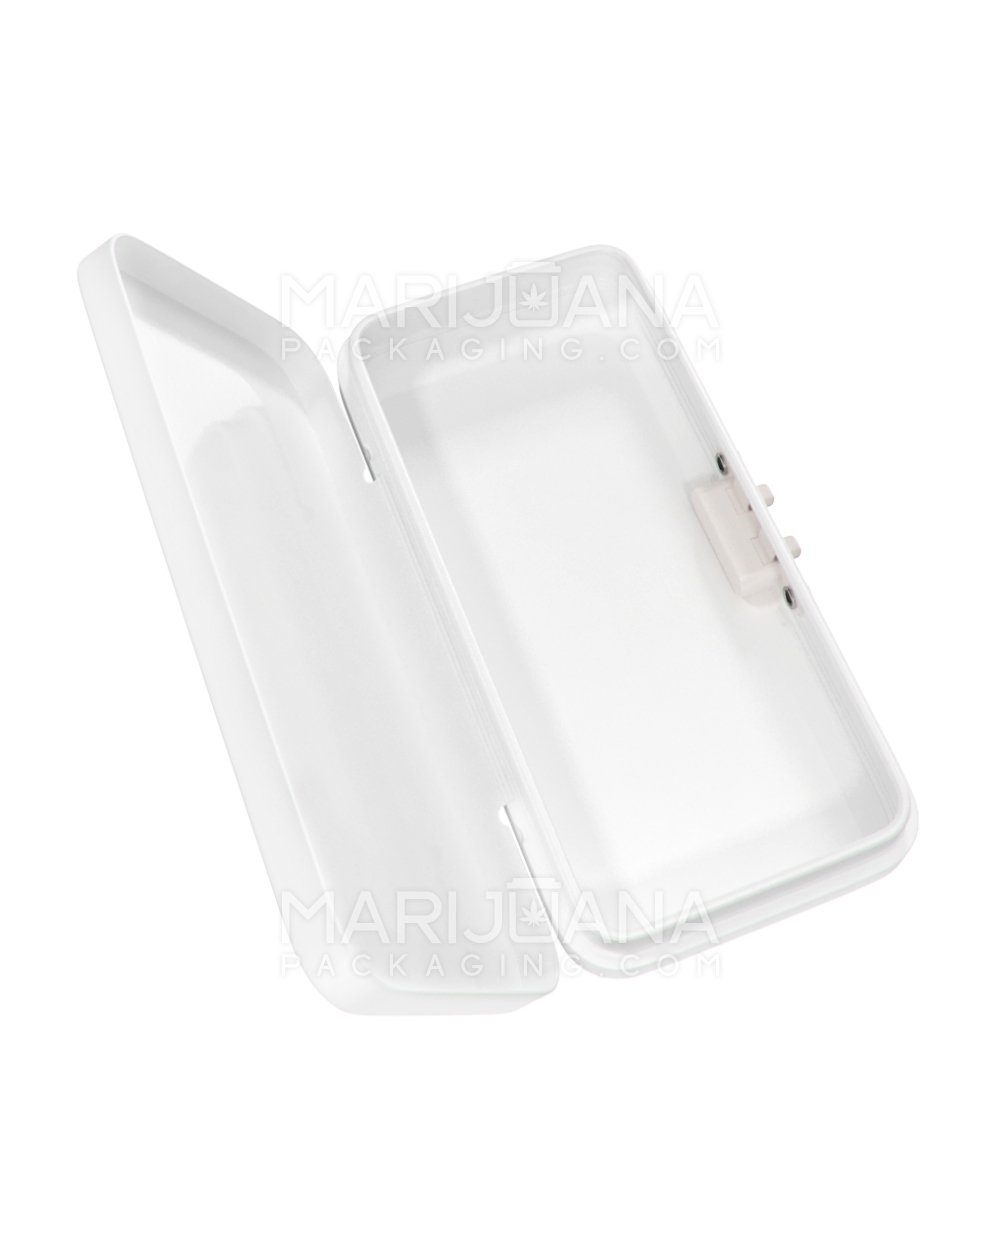 Custom 100% Recyclable Child Resistant Hinged-Lid Large Joint Box | 120mm x 61.7mm - White Tin - 6